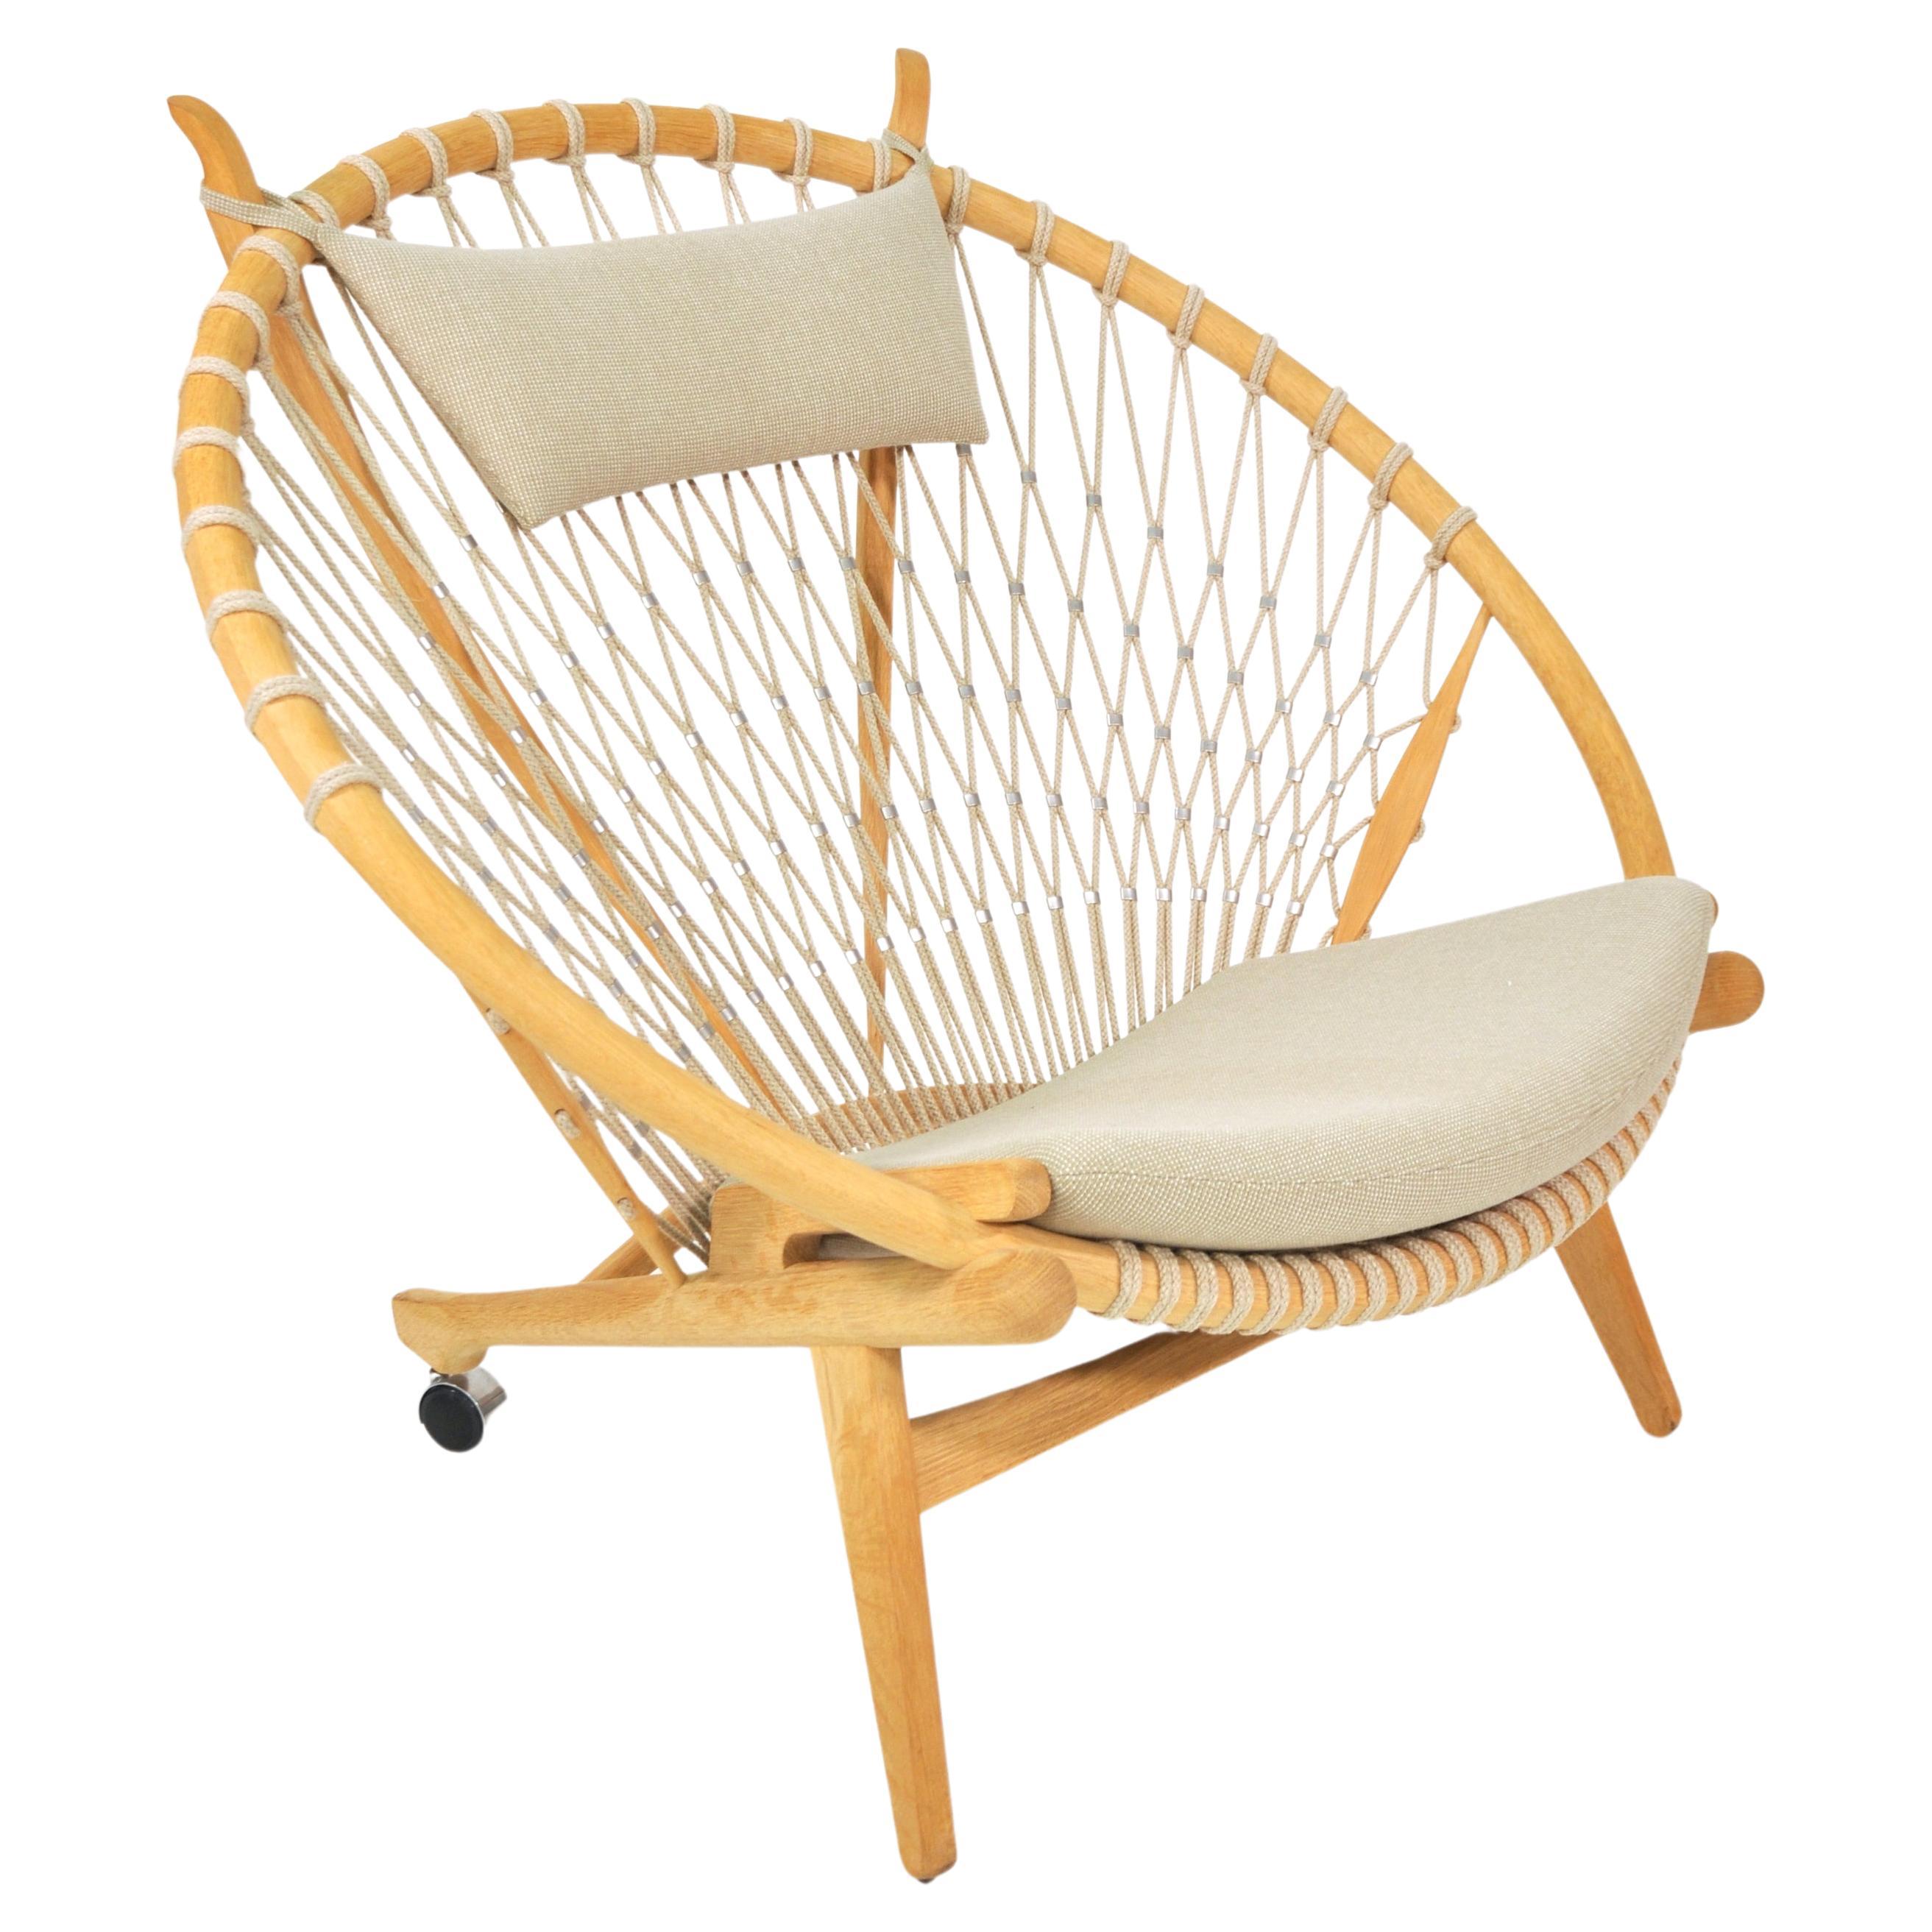 Stunning Scandinavian Mid-Century Modern easy chair designed by the Danish legend Hans Wegner in 1949, and put in production in 1986 by PP Mobler. The made to order hoop lounge chair features a net of pleated flag line with stainless steel clips, a